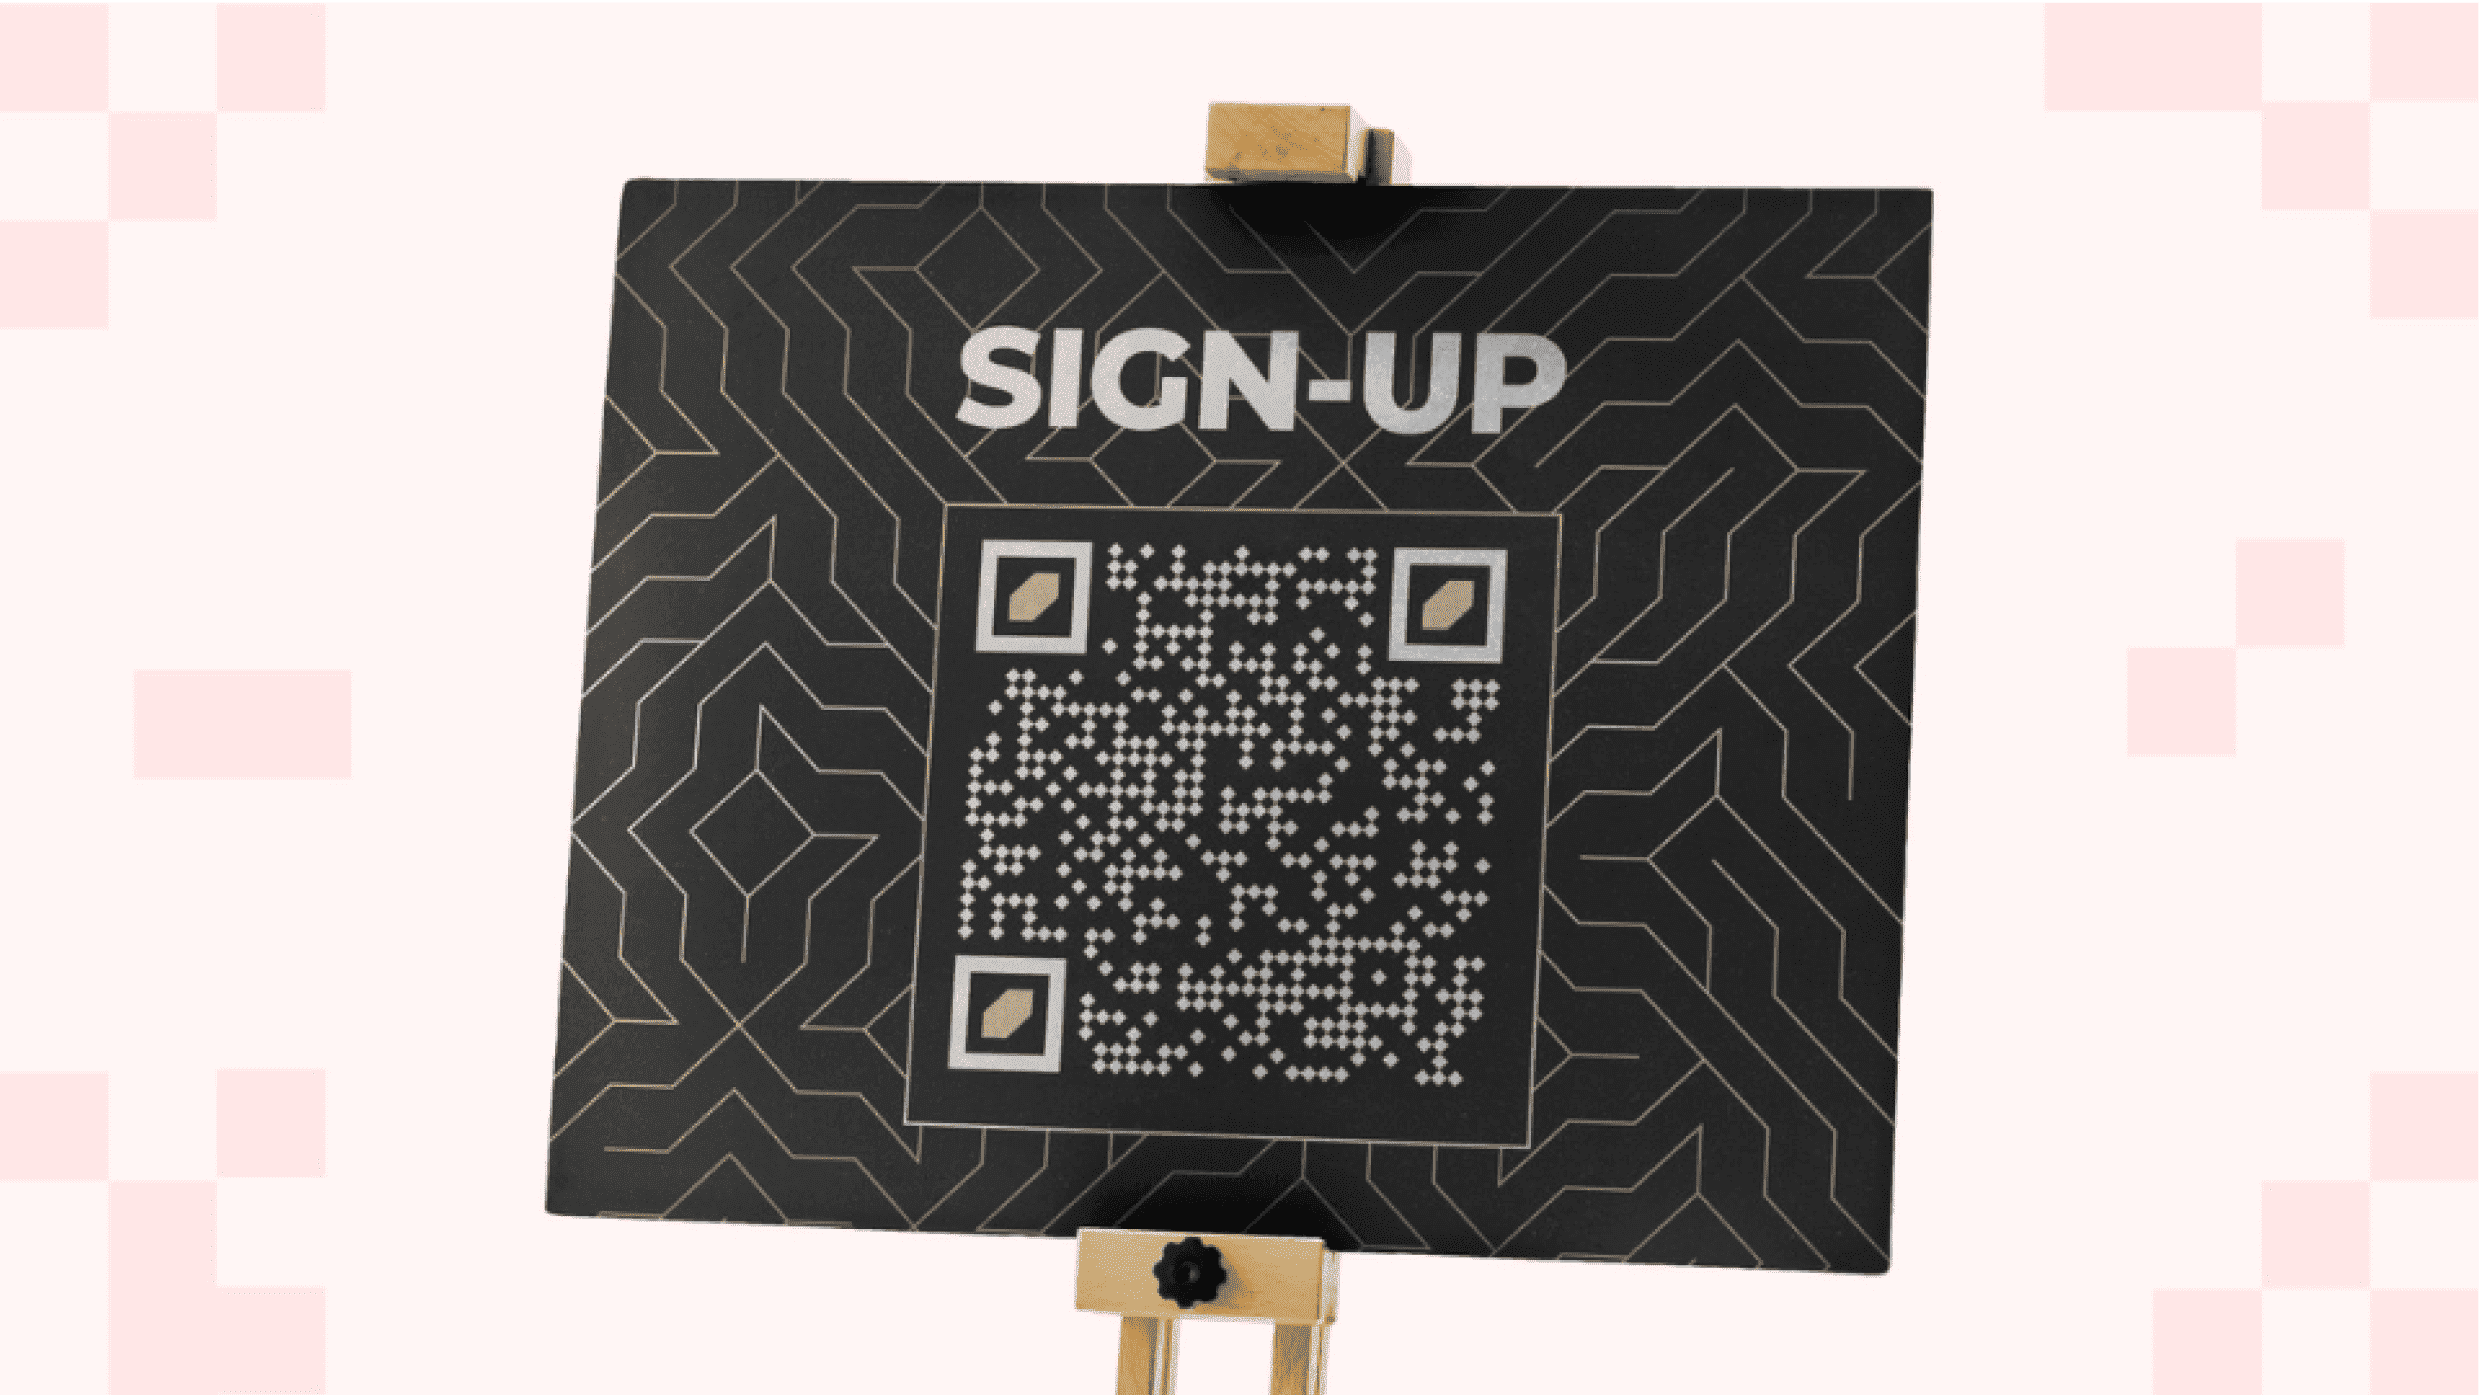 How to Make a QR Code in 5 Easy Steps